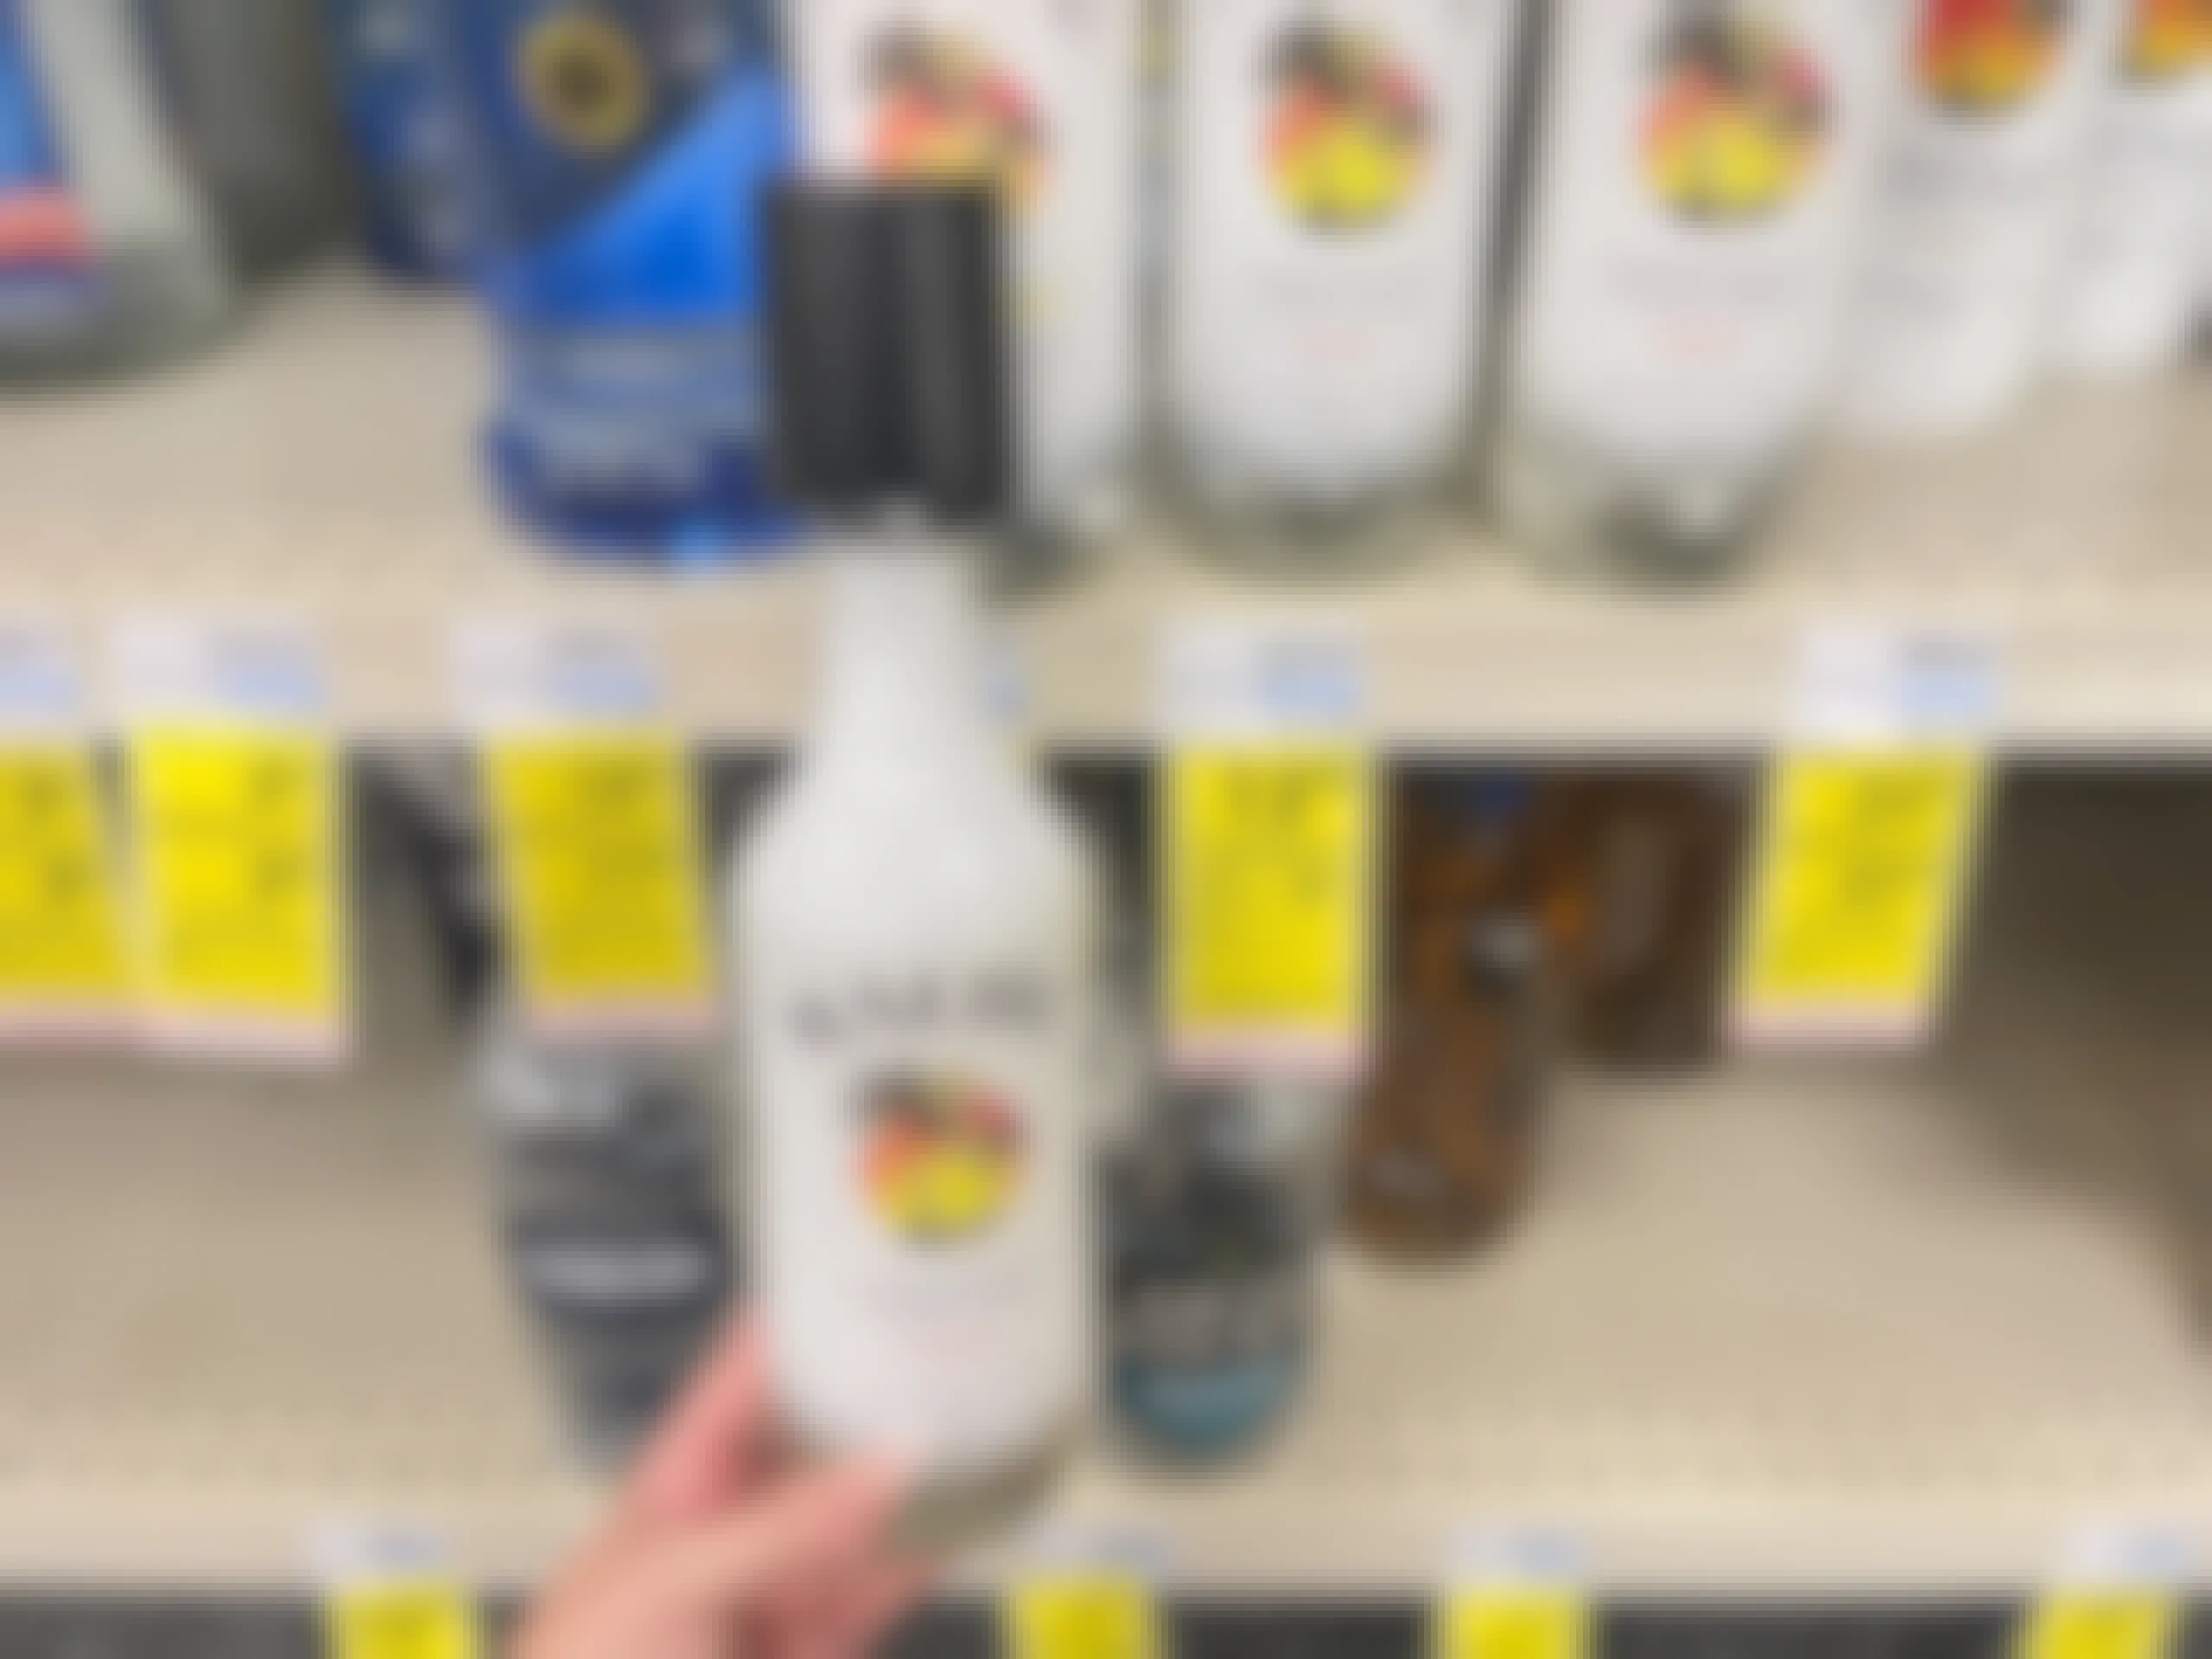 750ml bottle of malibu rum next to $13.99 sales tag at CVS